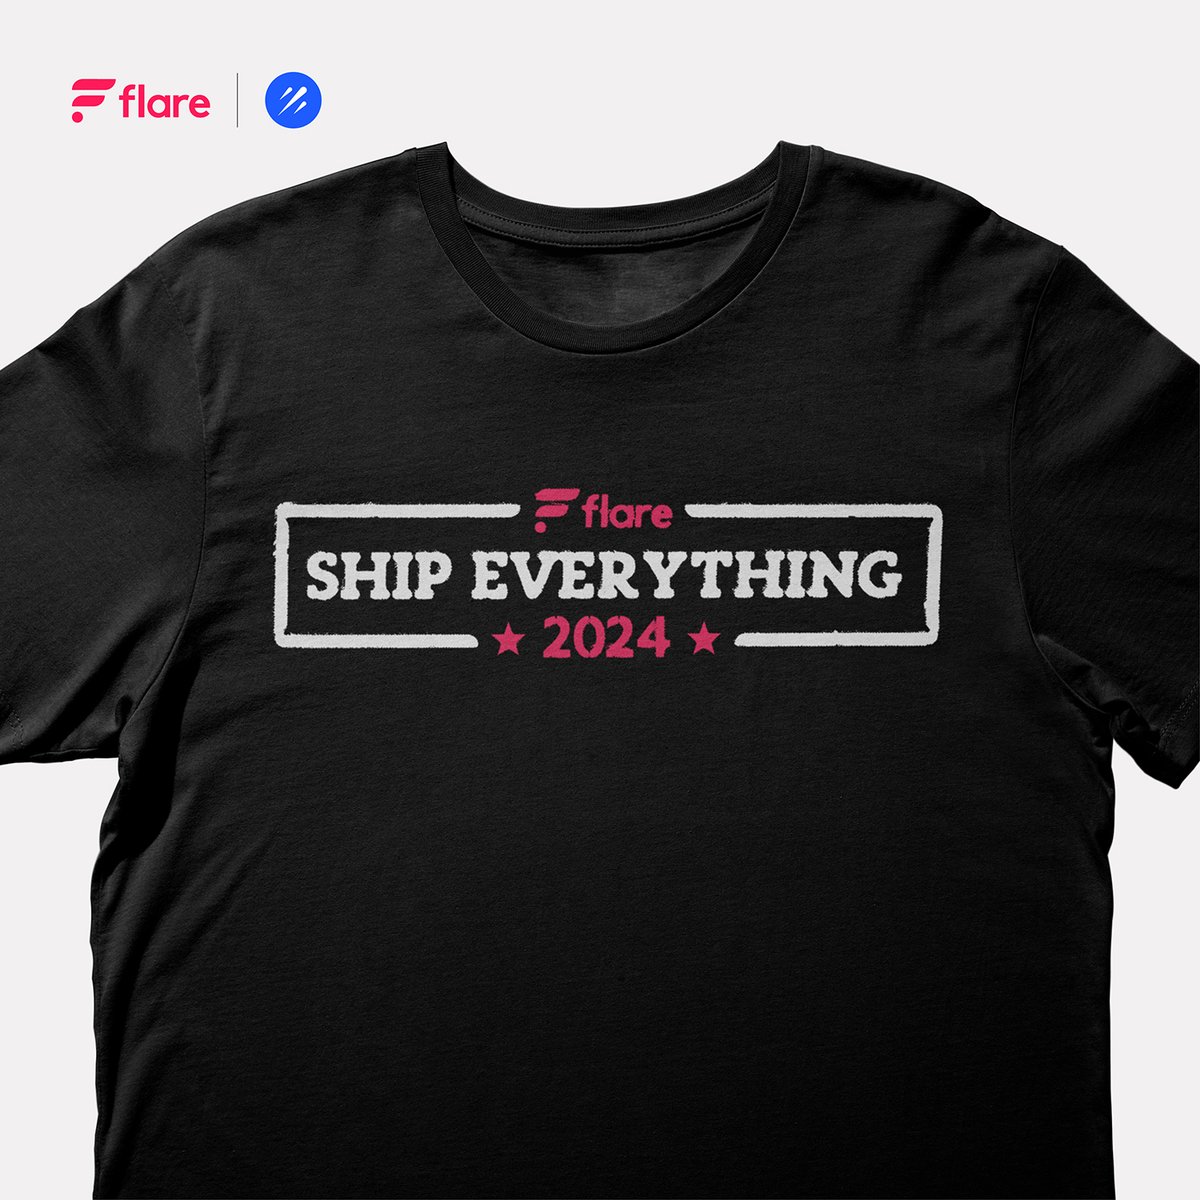 Posting our #ShipEverything T-shirt to our @Galxe quests winners. Hope to see you wearing it in our next meetup ☀️